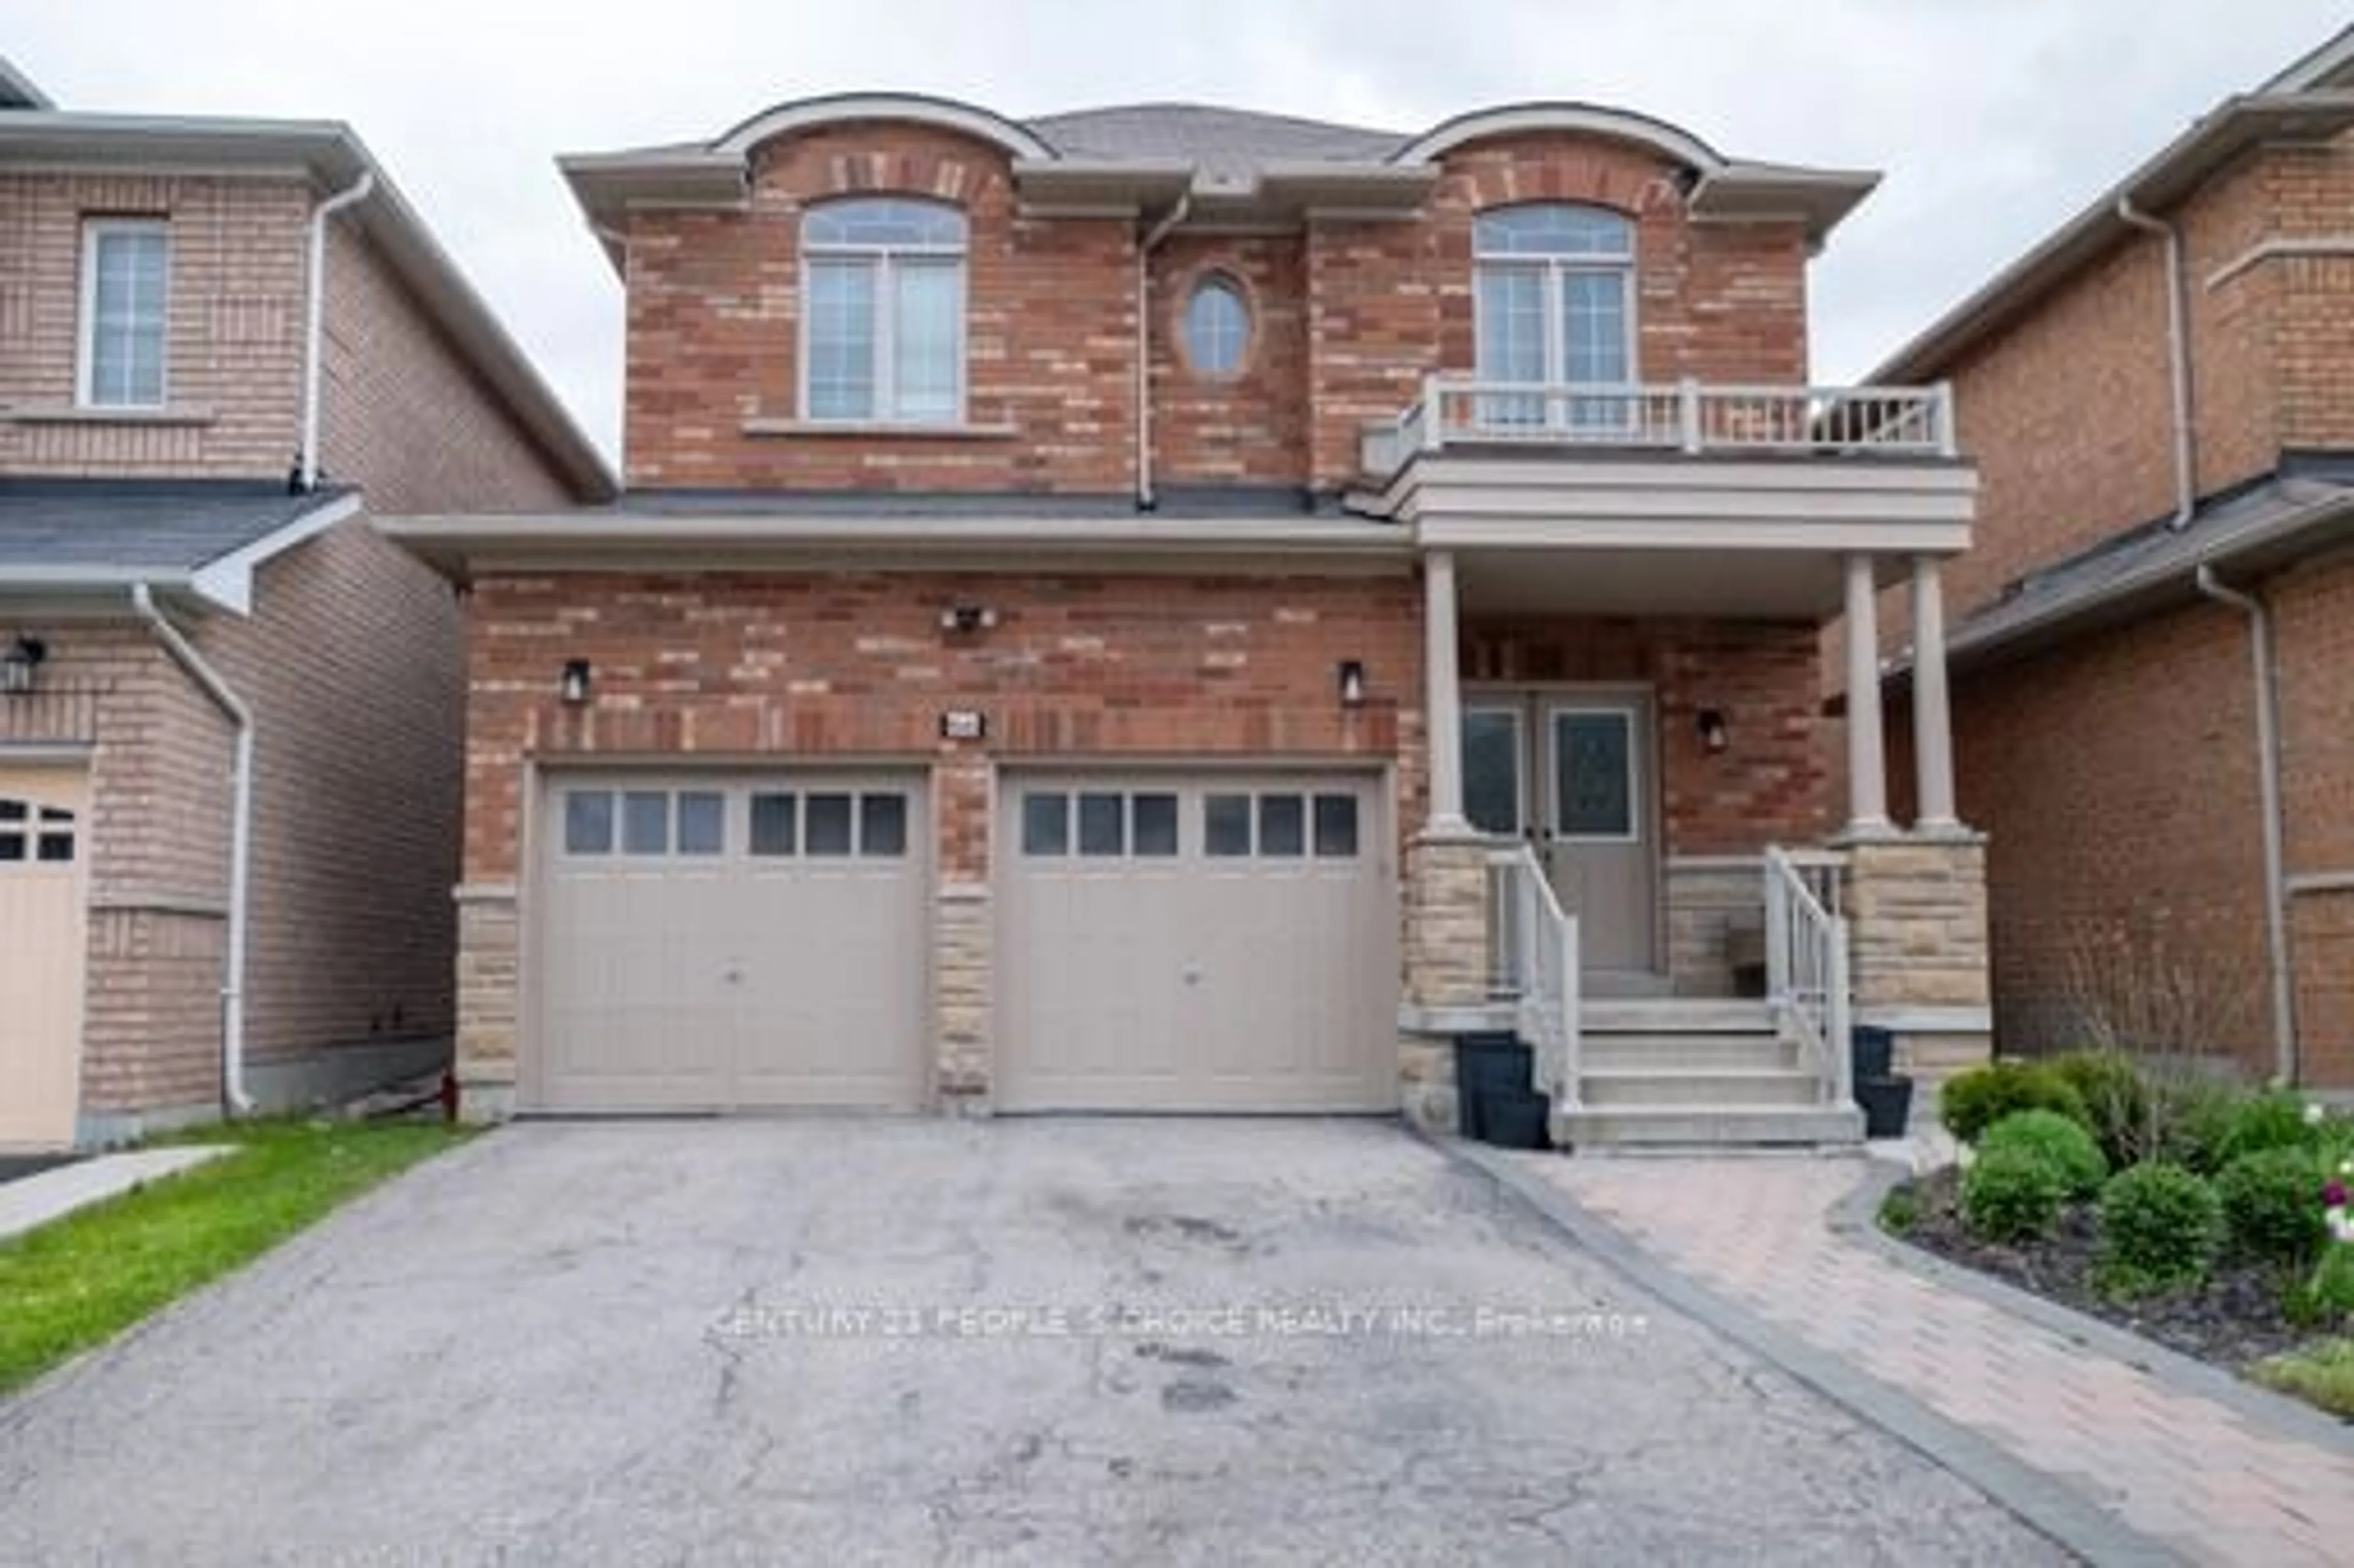 Home with brick exterior material for 66 Attview Cres, Brampton Ontario L6P 2R5